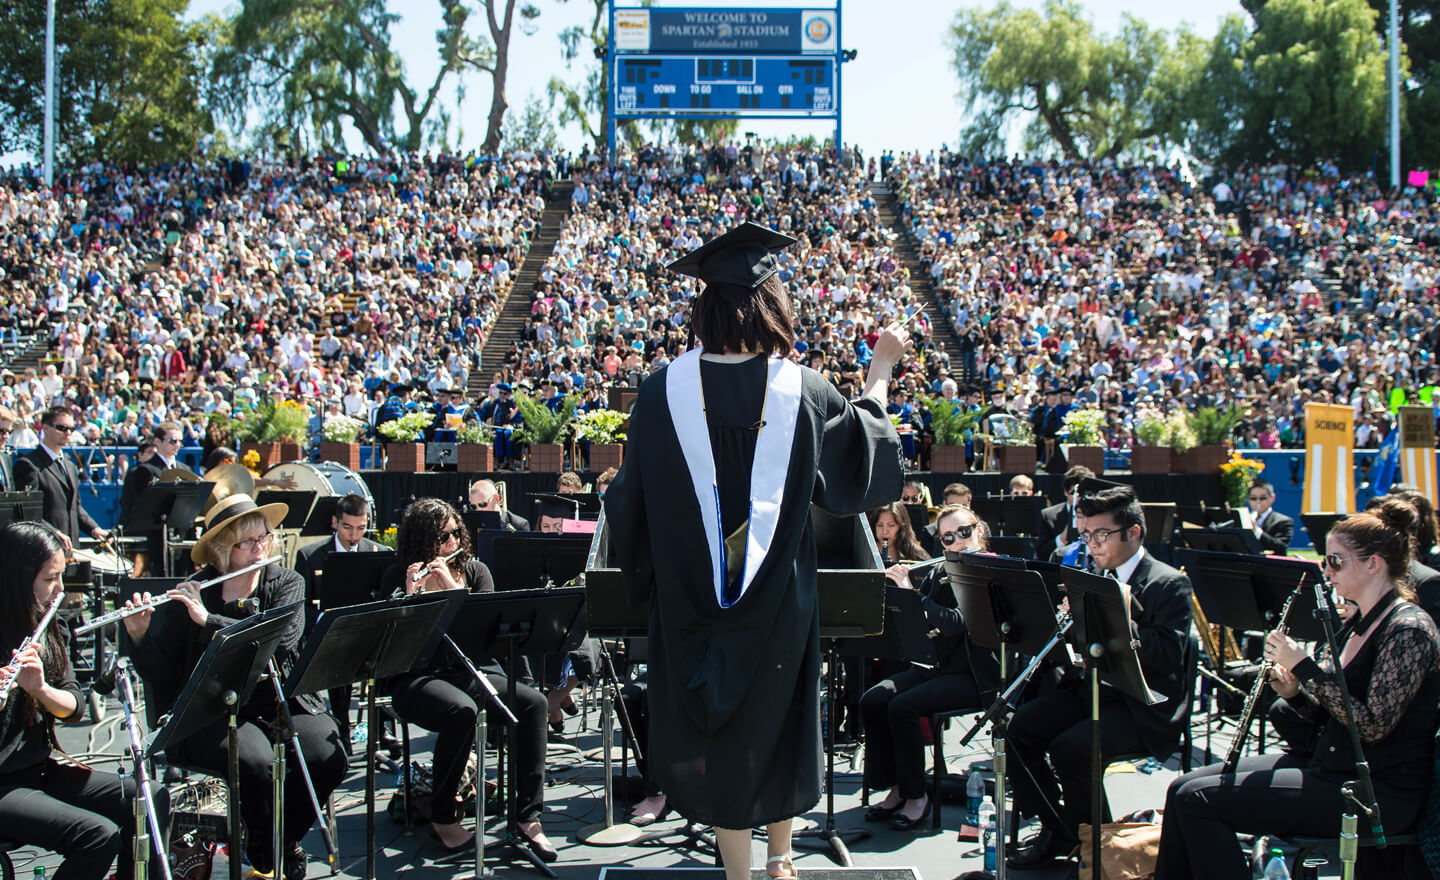 sjsu music students perform during commencement.